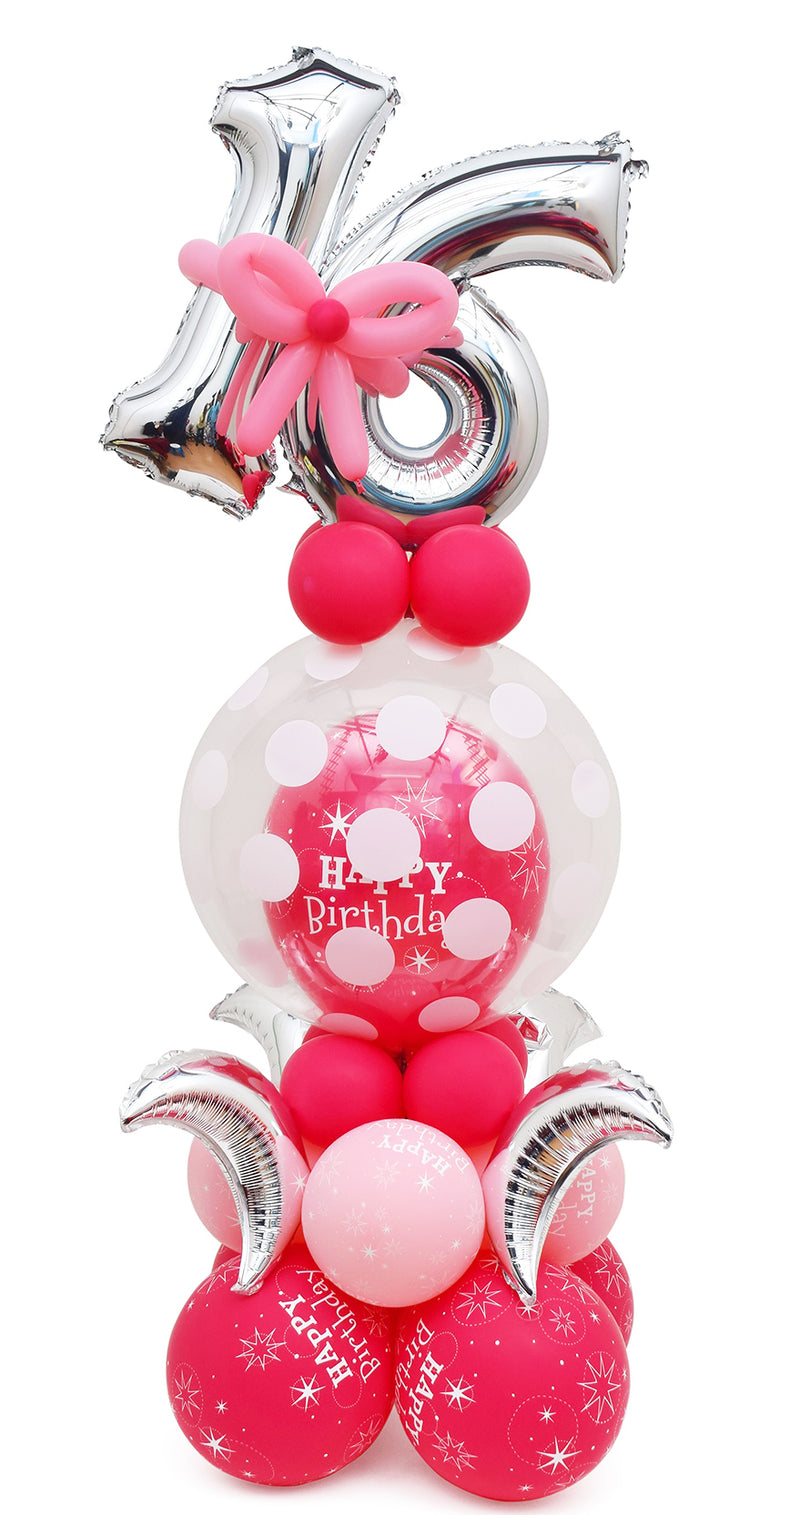 Bubble Birthday Balloon Arrangement with any 2 numbers